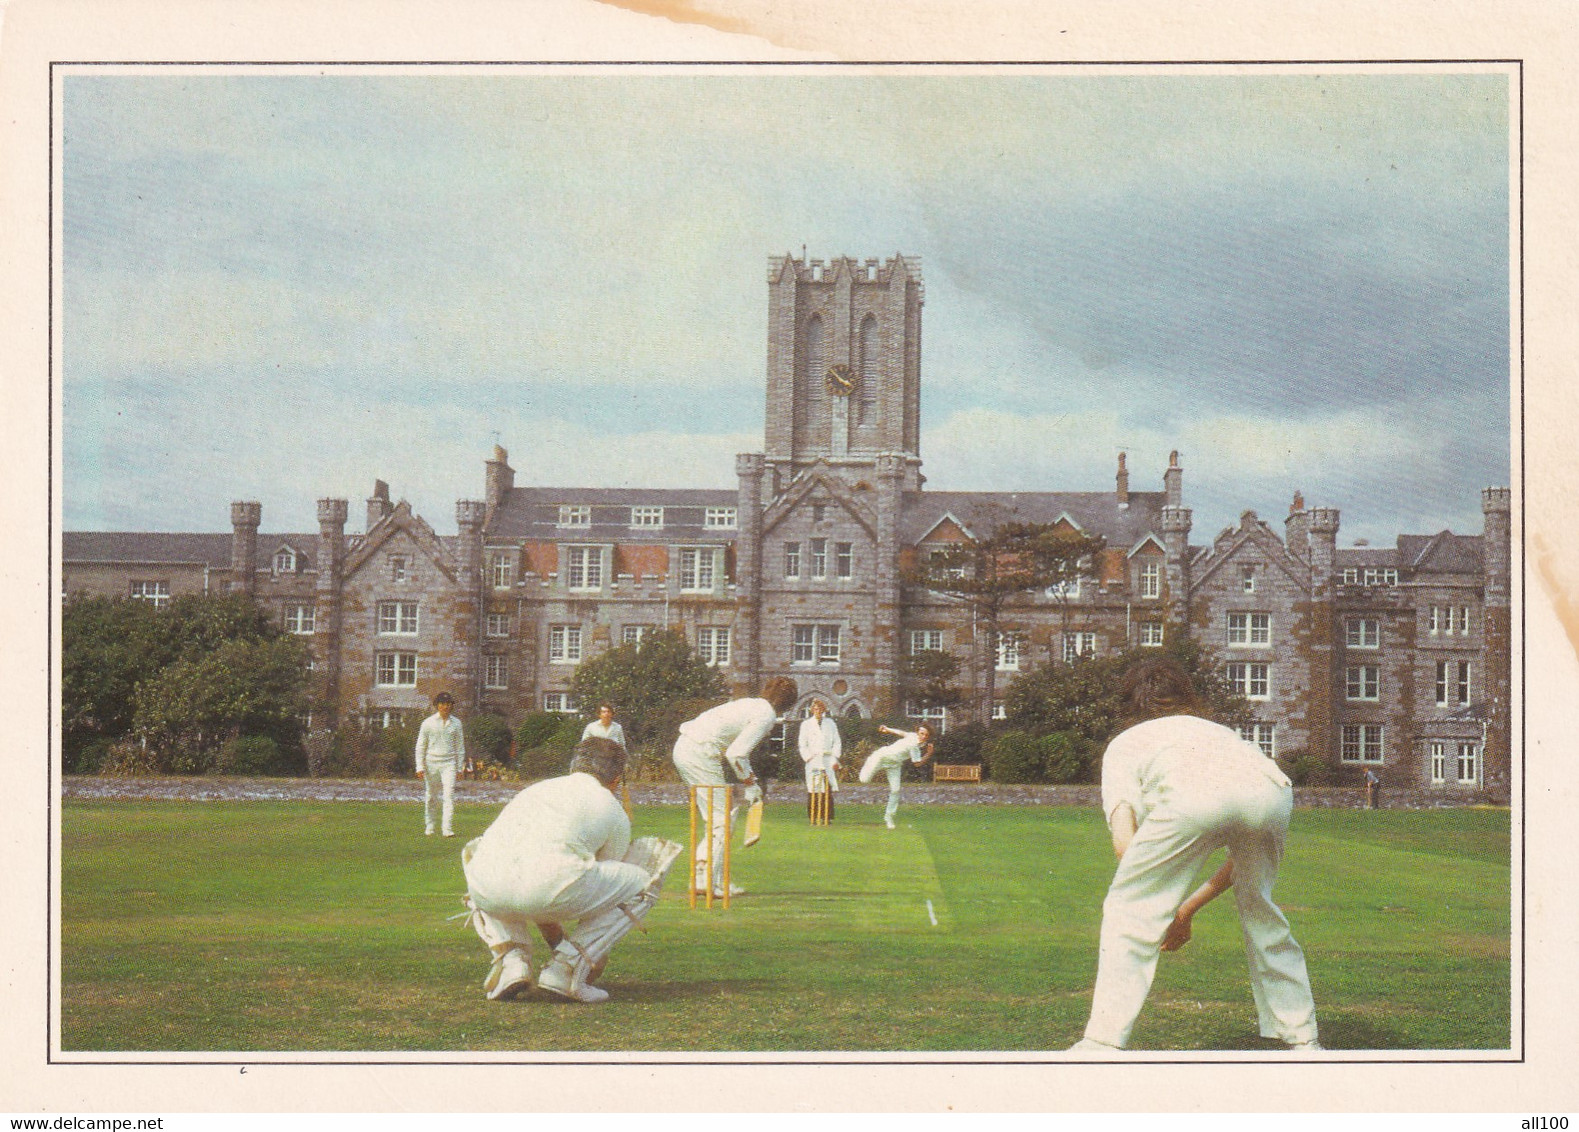 A20462 - CASTLETOWN A GAME OF CRICKET AT KING WILLIAM'S COLLEGE CRICKET ENGLAND UNITED KINGDOM - Cricket